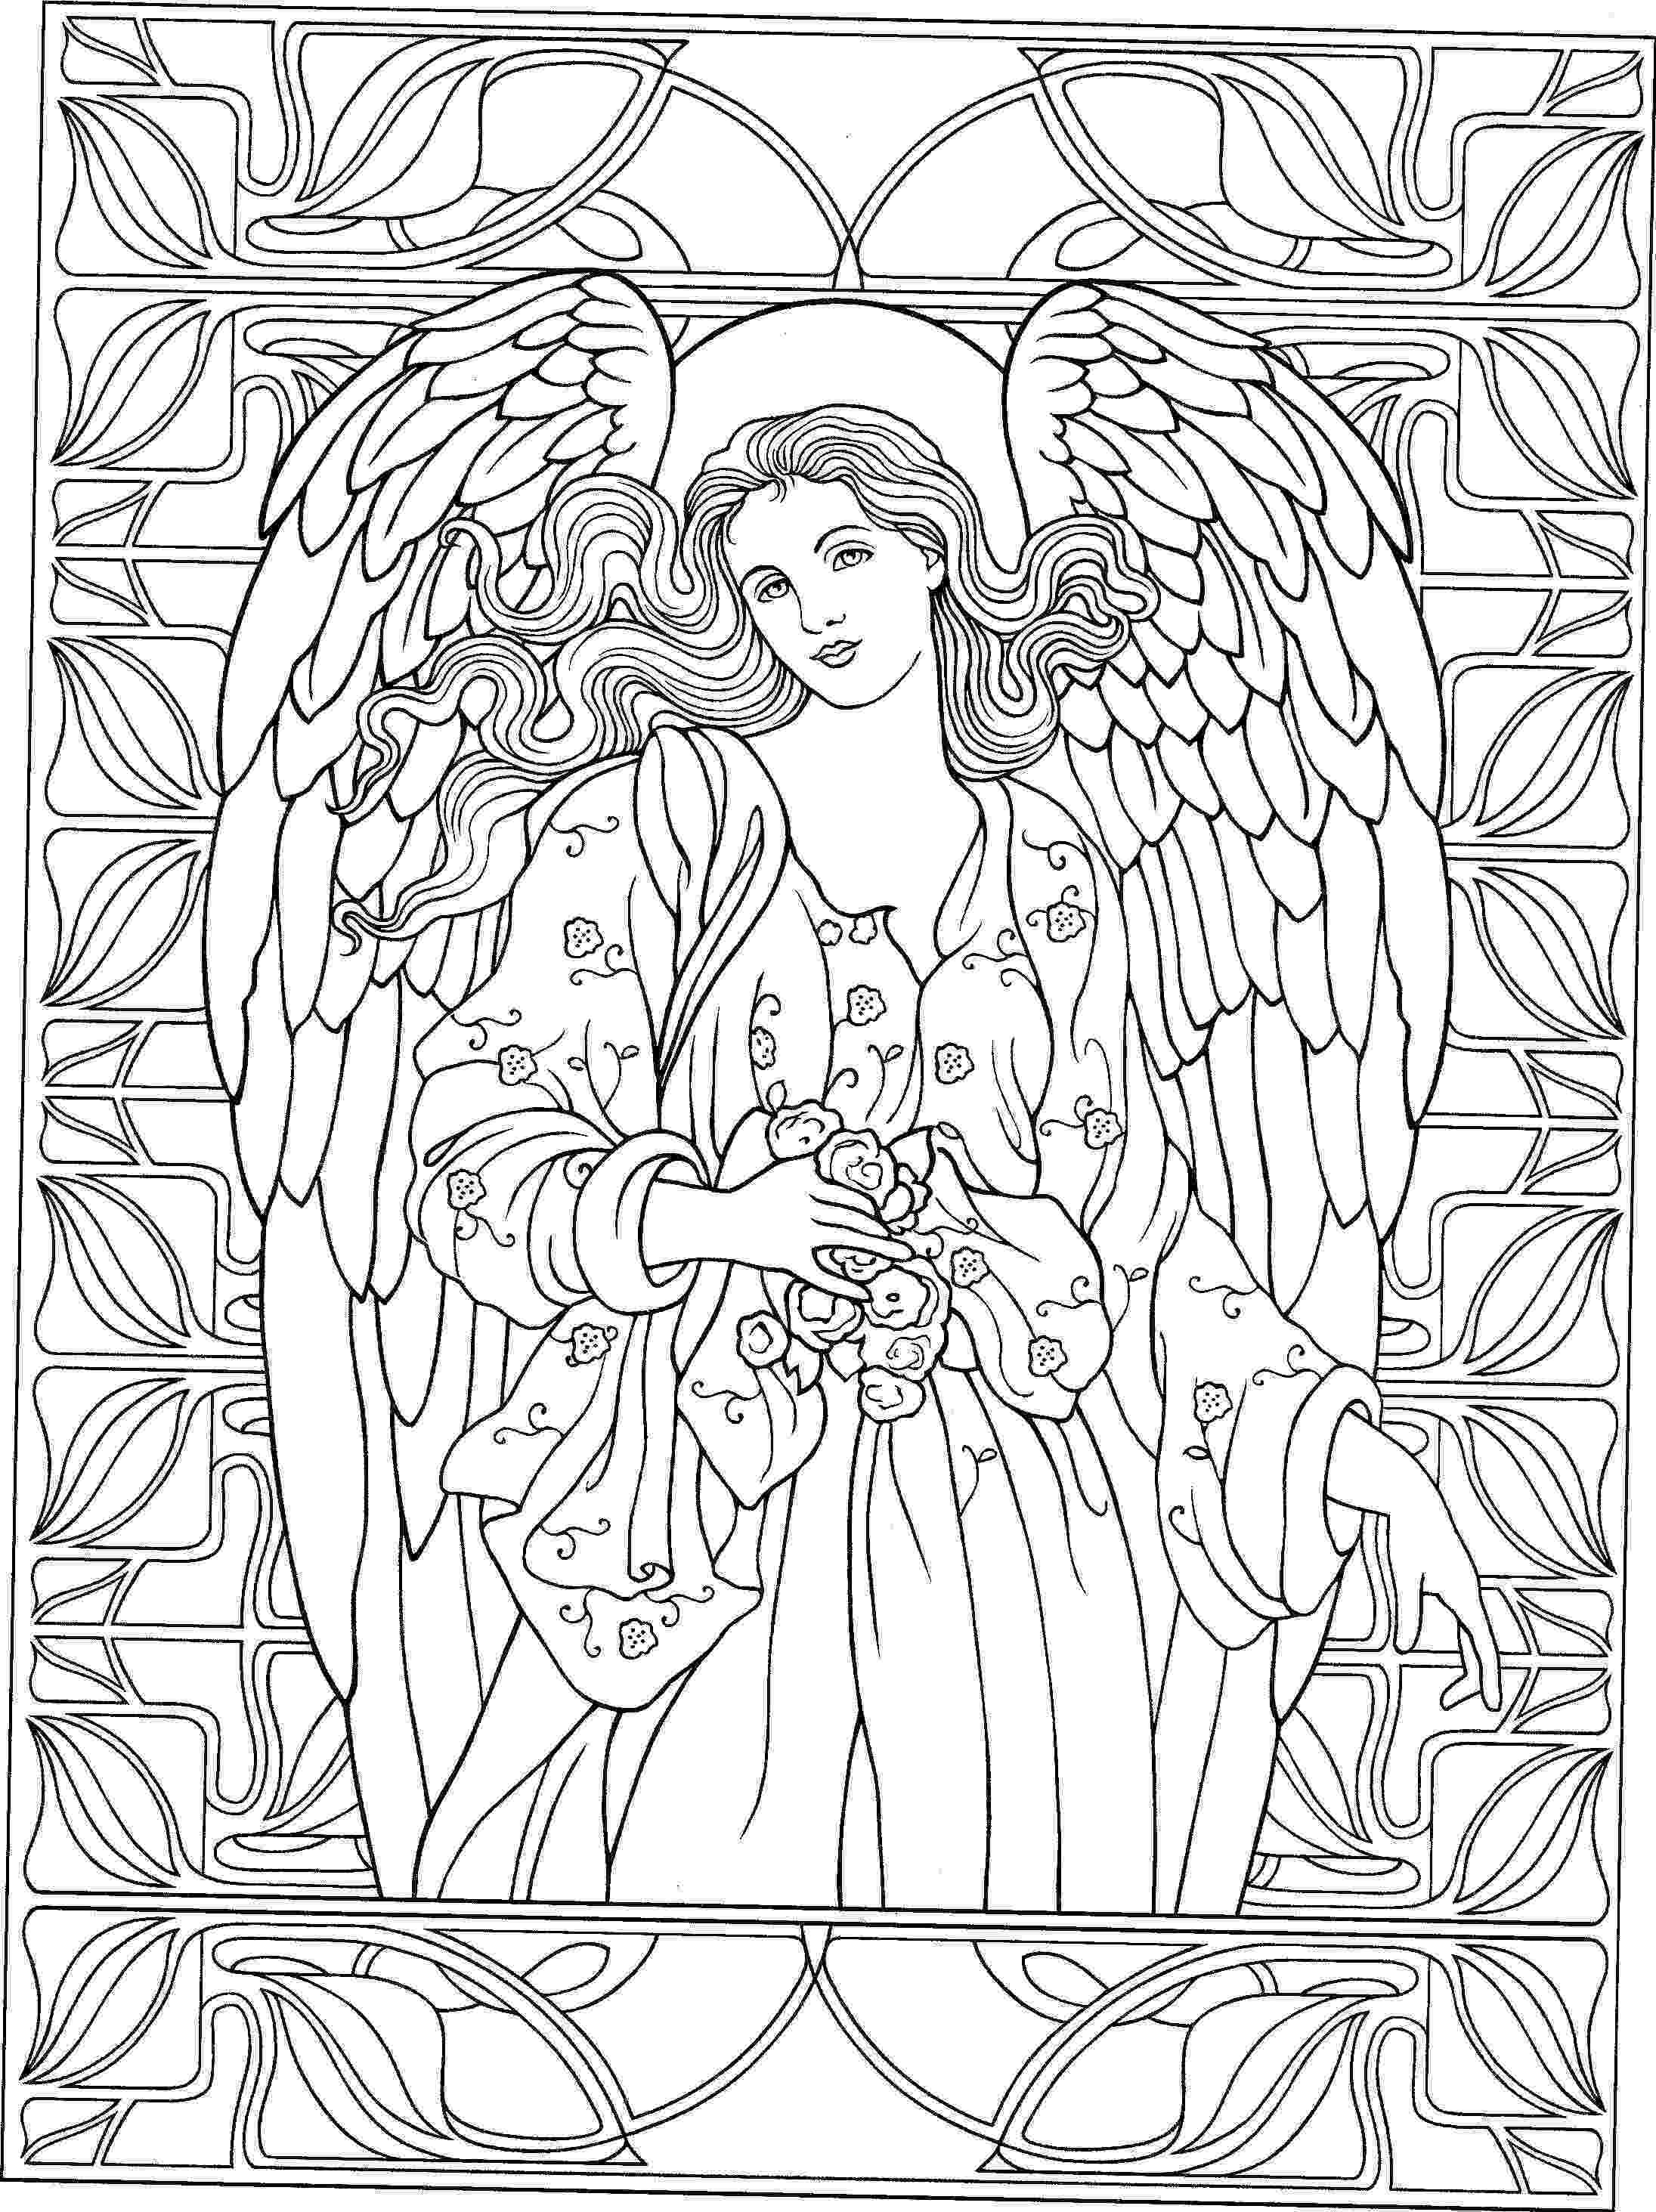 coloring pages of angels 3823e3973b2d9354e5eb55074cc59aa3jpg 21912927 Женский pages angels of coloring 